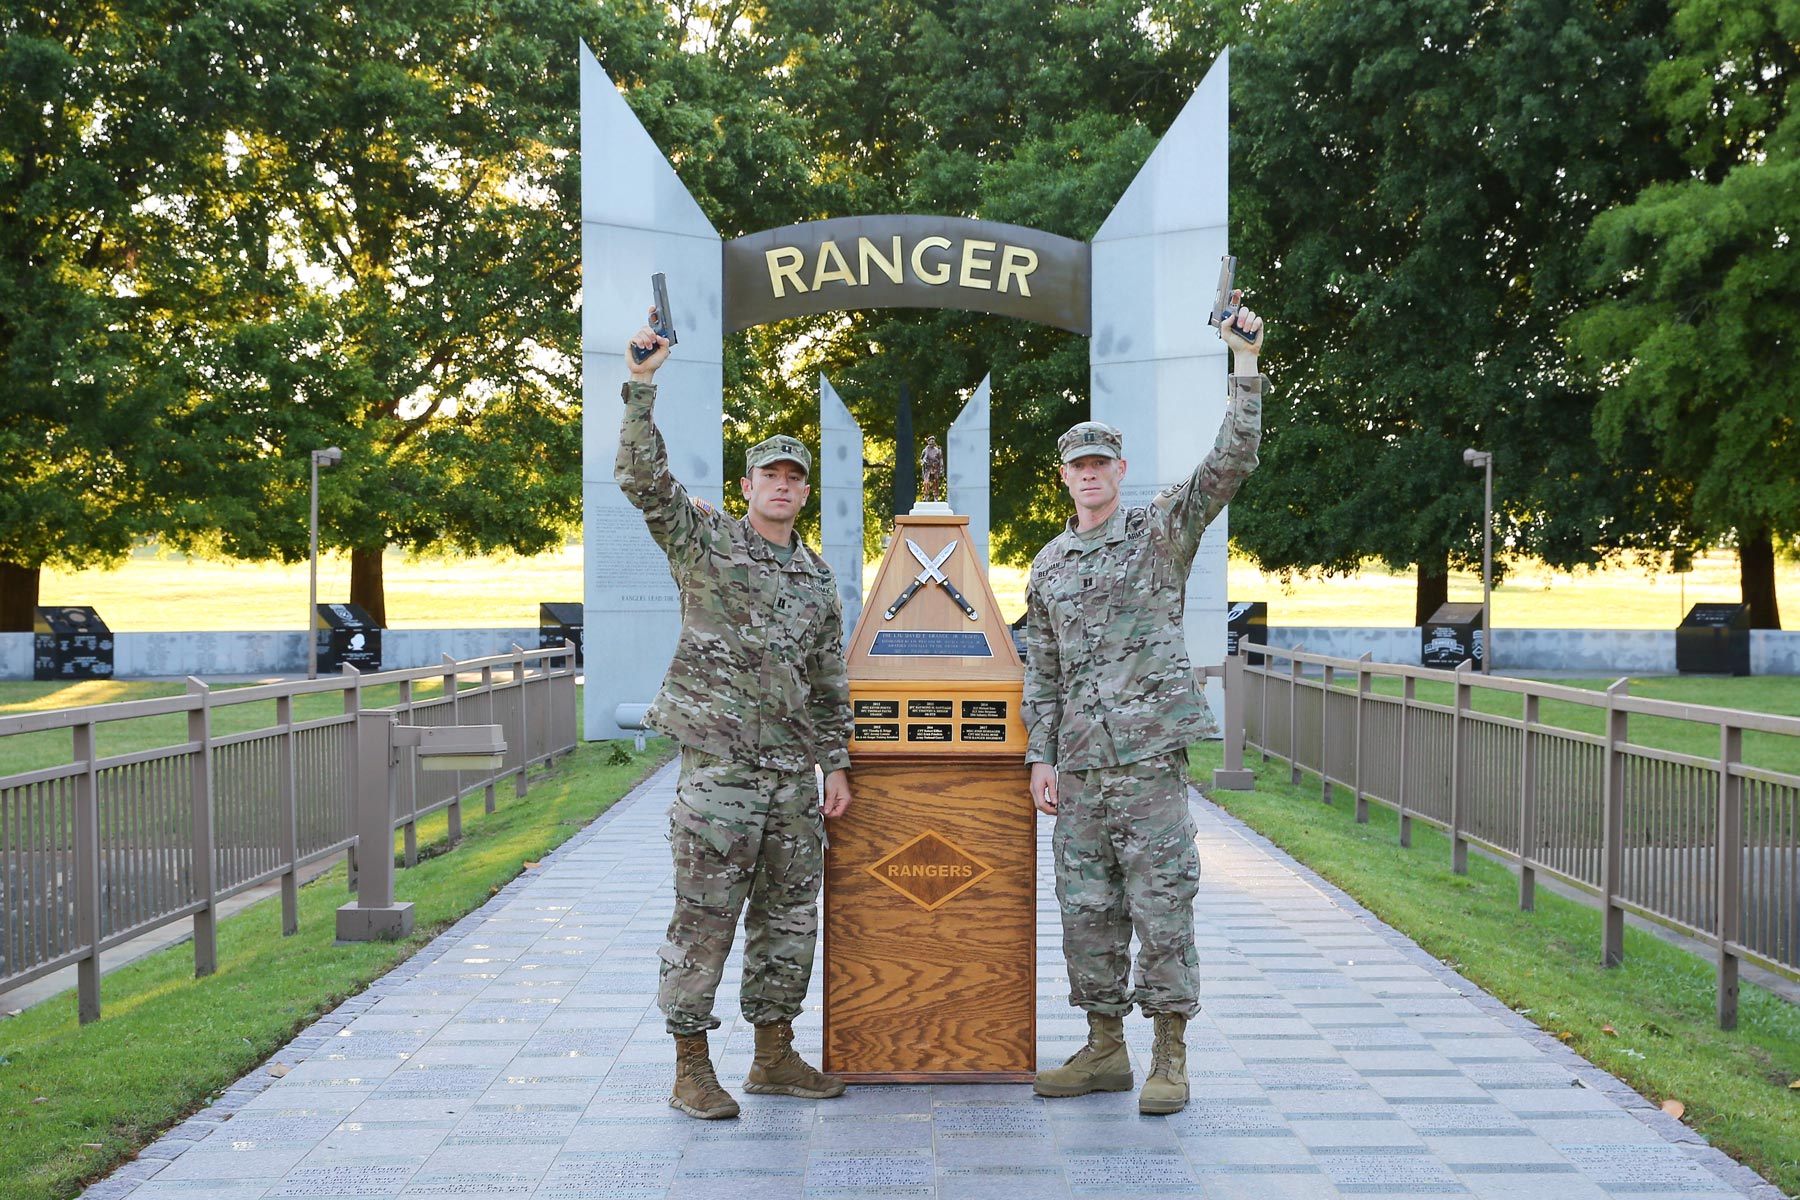 Once Again, Conventional Army Teams Snag Top Spots at Best Ranger